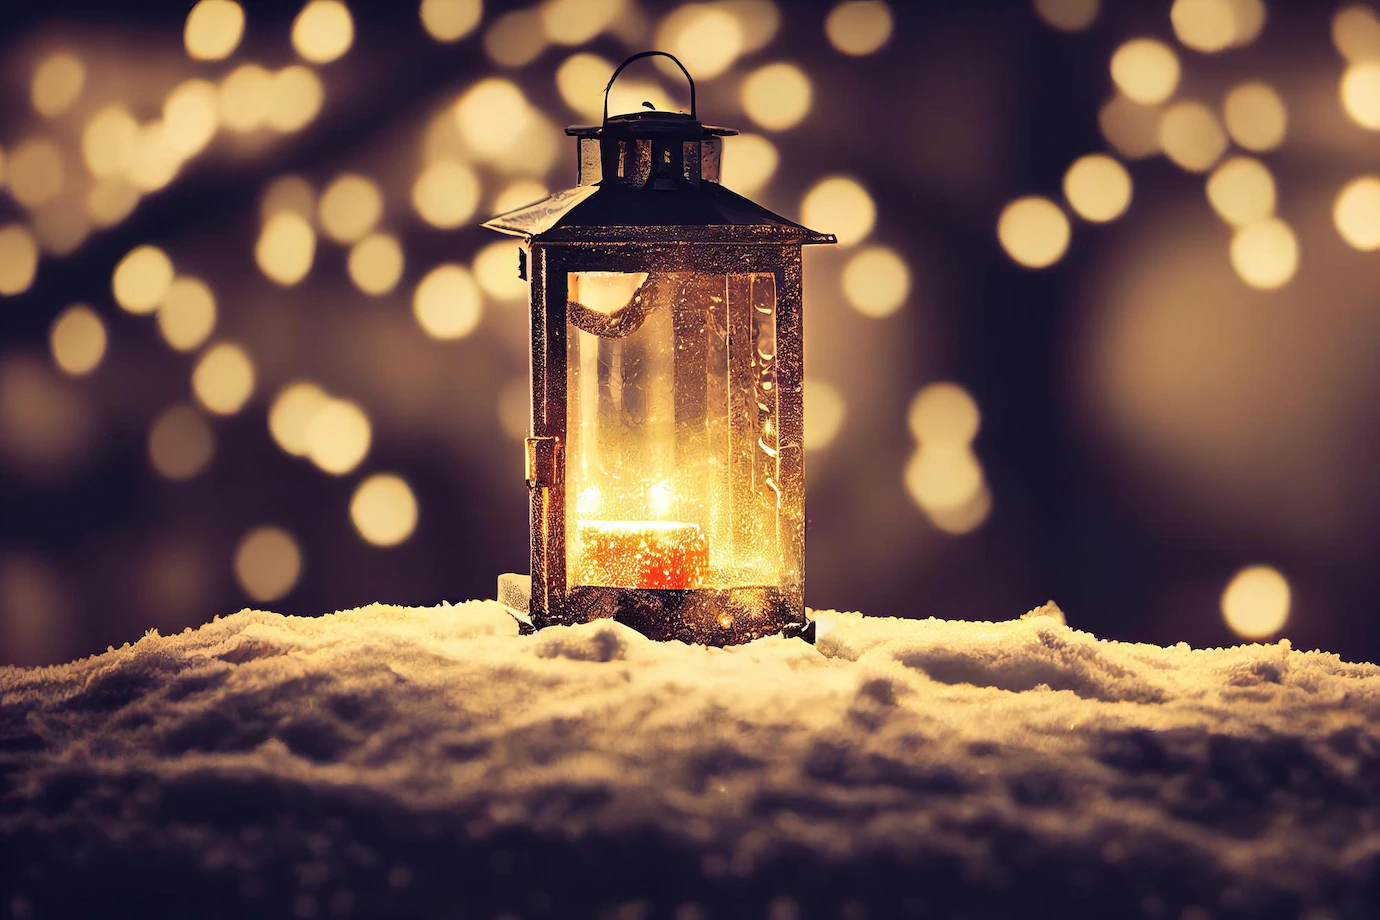 a festive winter Christmas lantern in the snow